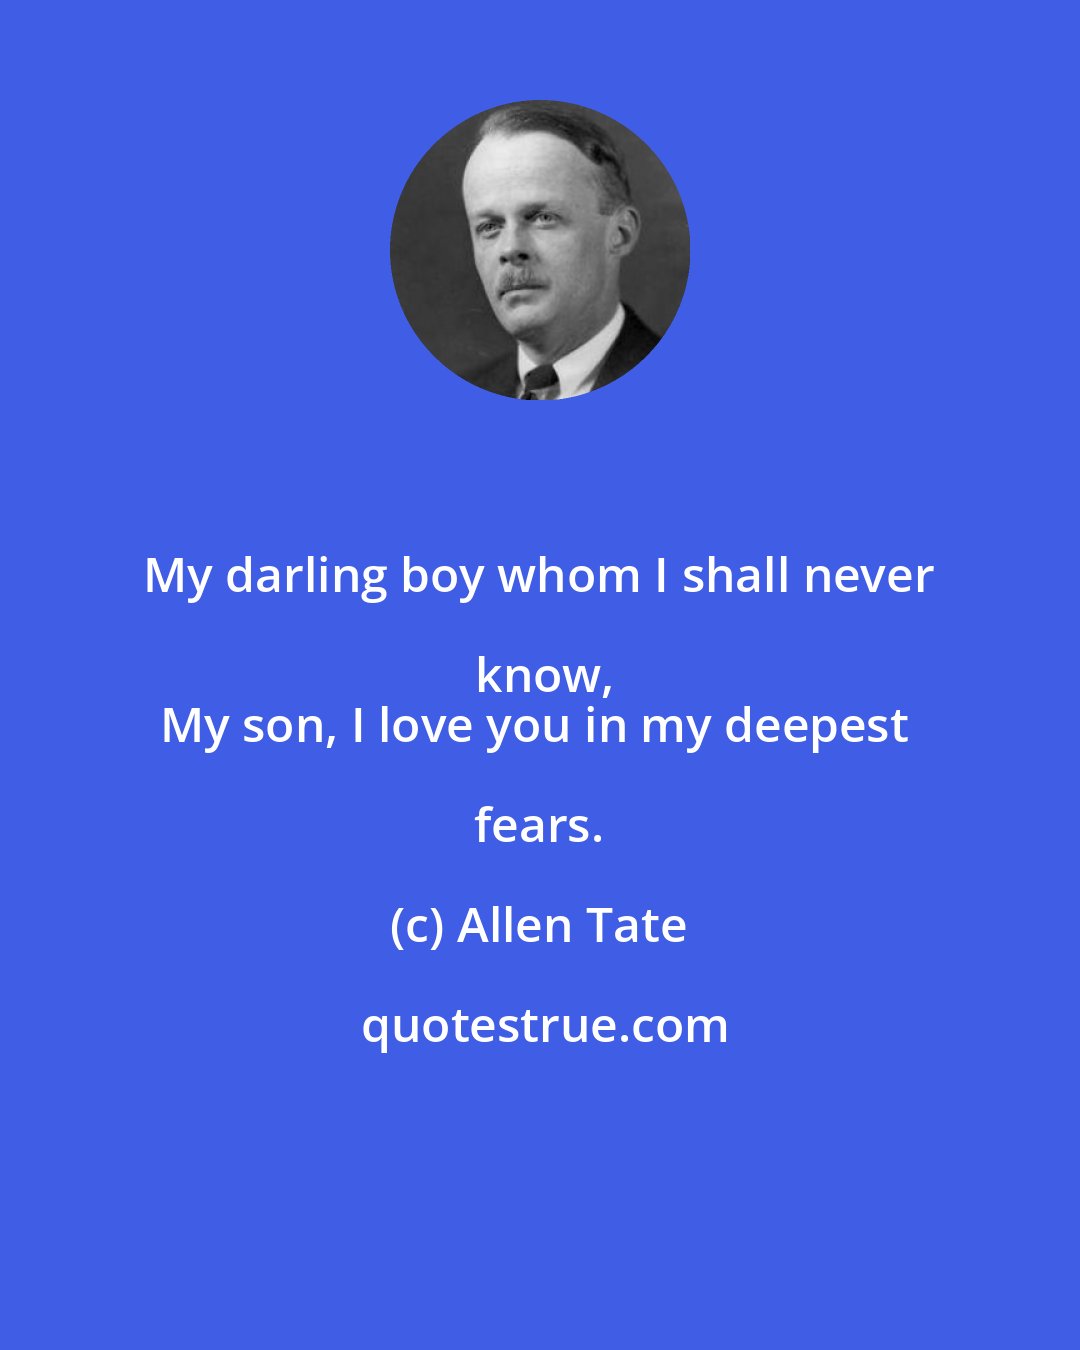 Allen Tate: My darling boy whom I shall never know,
My son, I love you in my deepest fears.